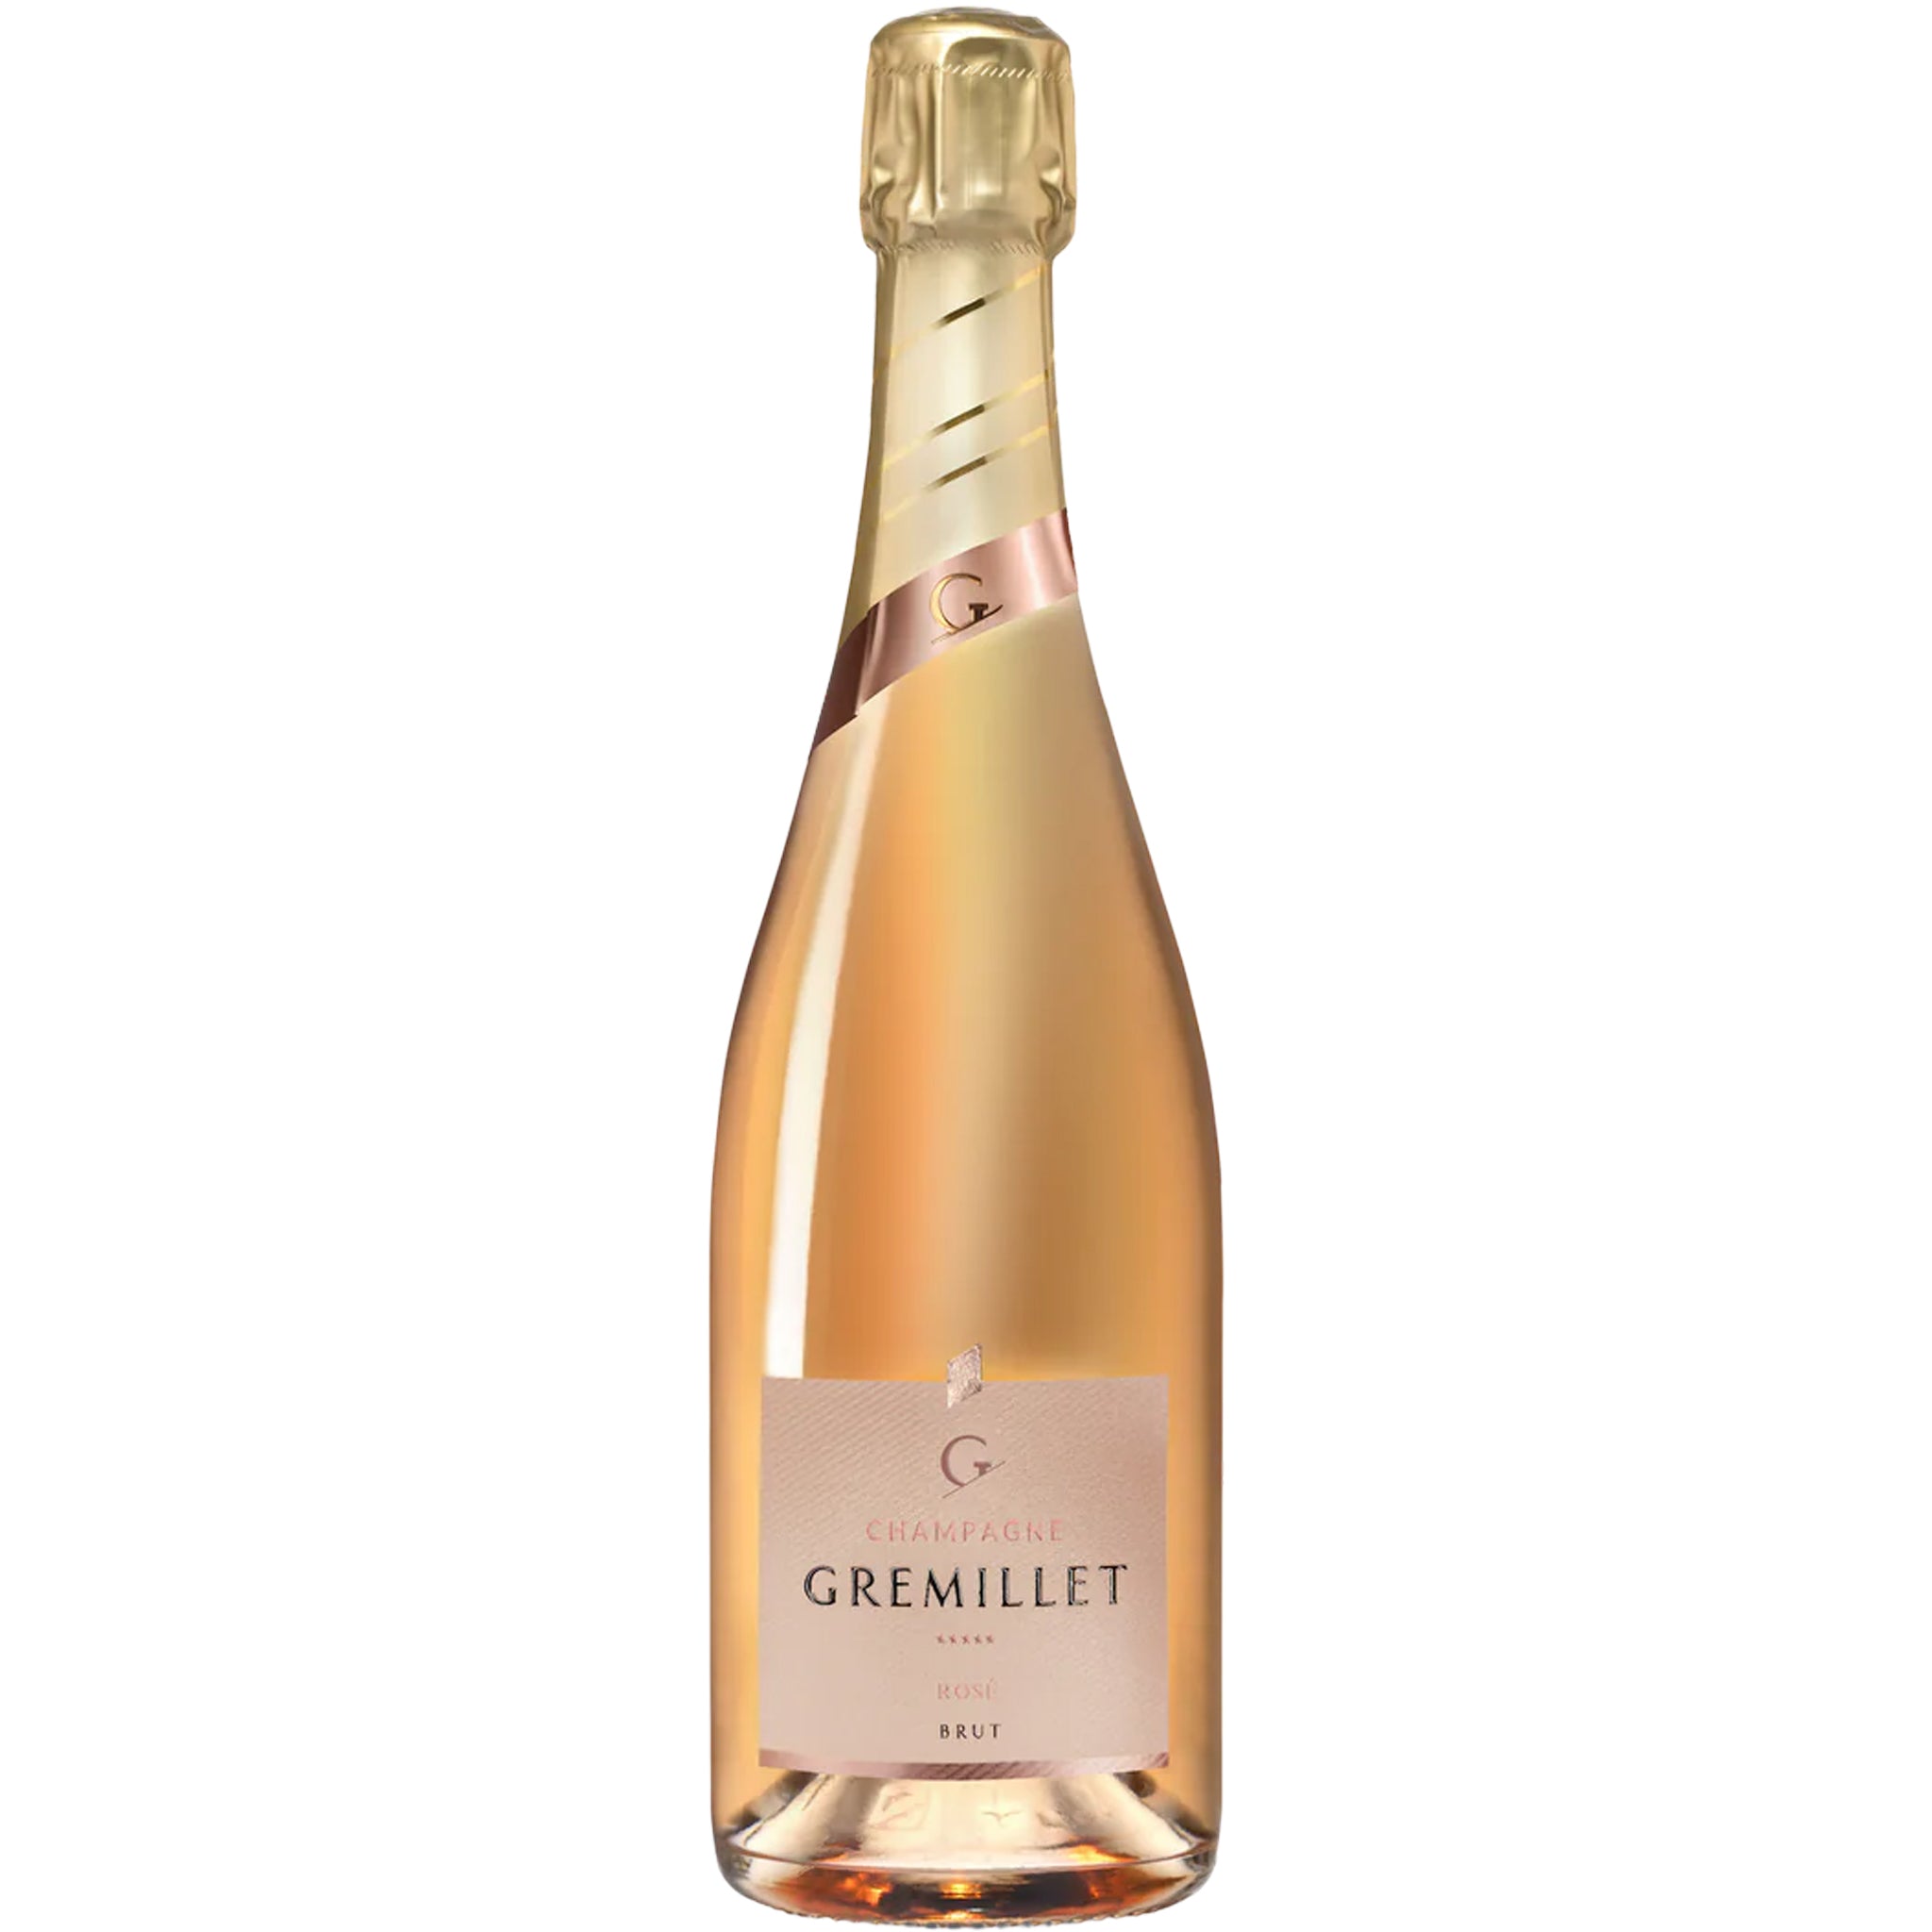 21 victory champagnes from the Champagne region of France